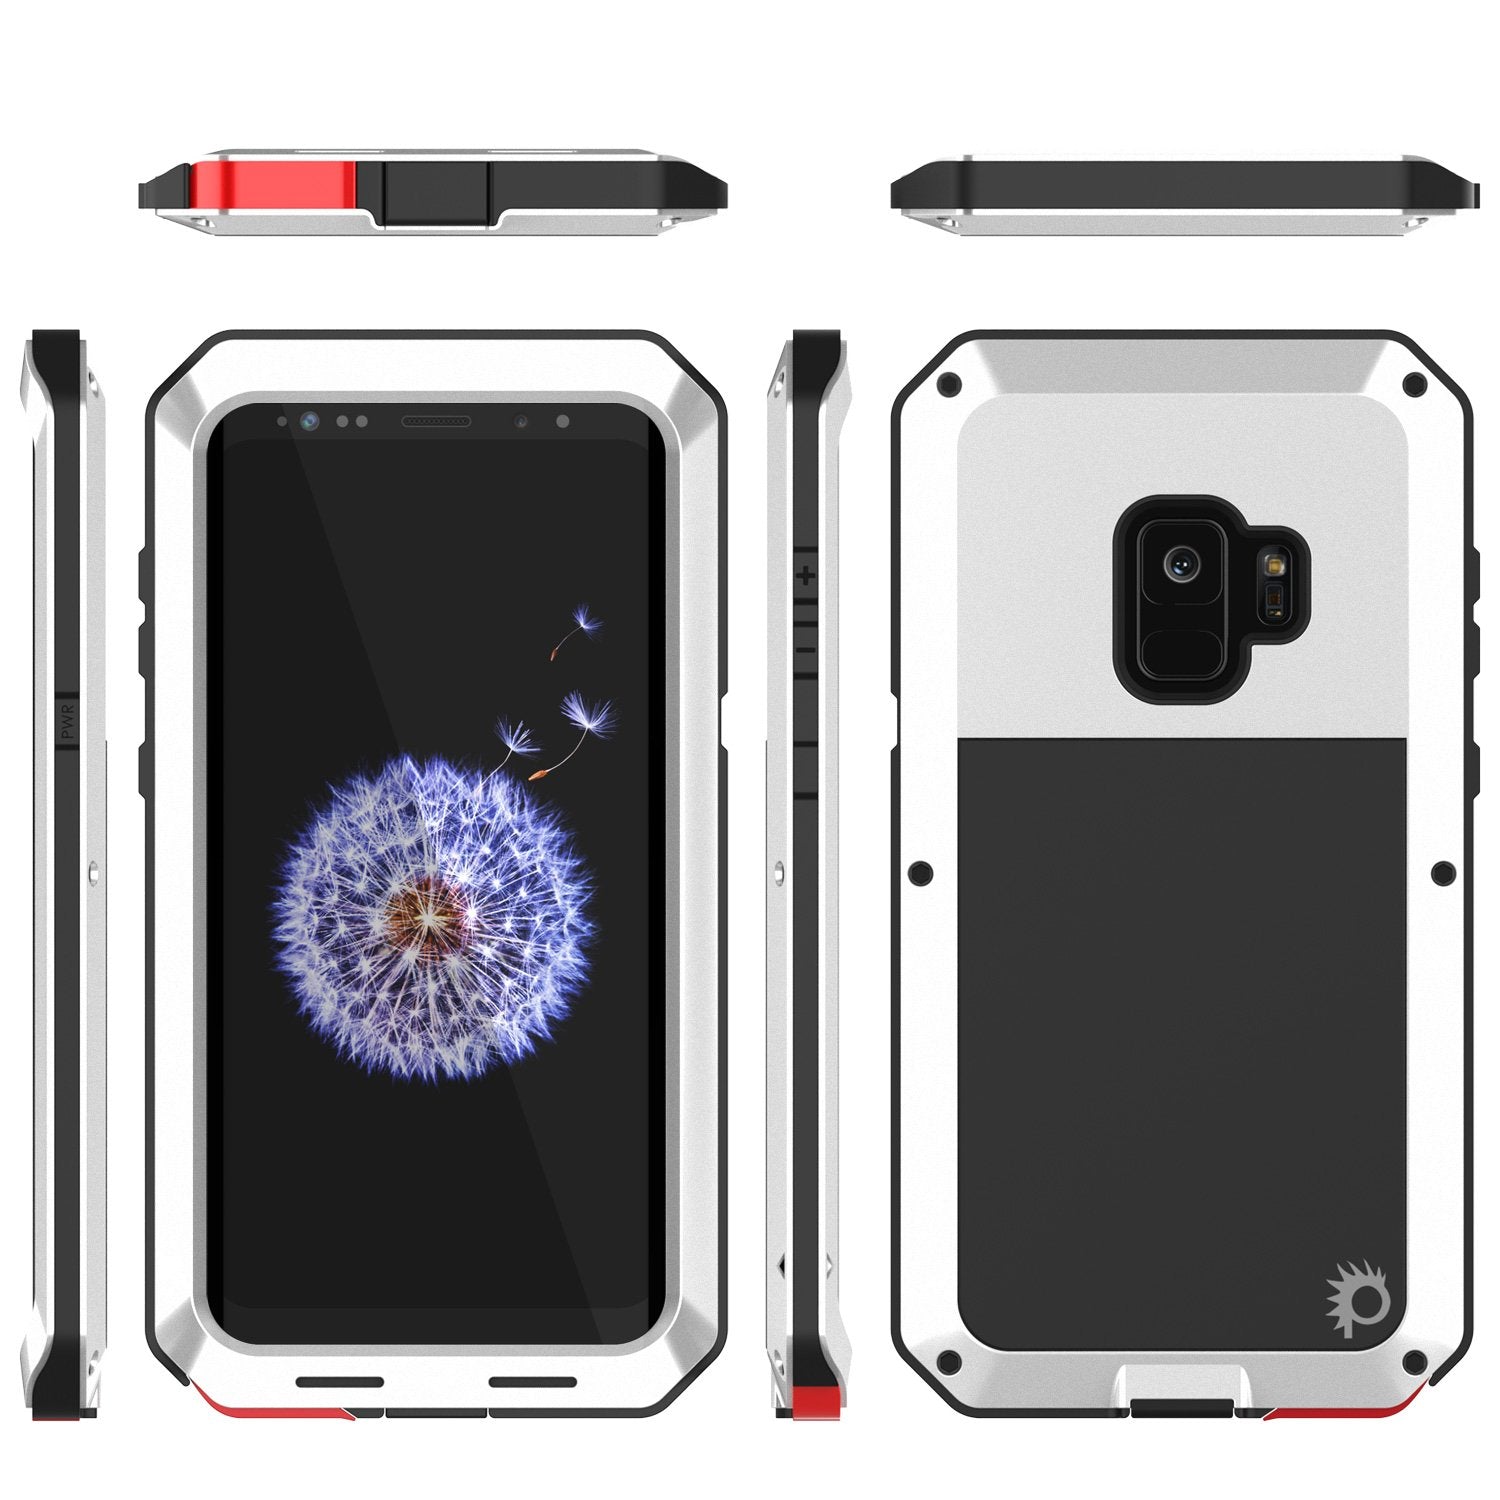 Galaxy S9 Metal Case, Heavy Duty Military Grade Rugged case [White]